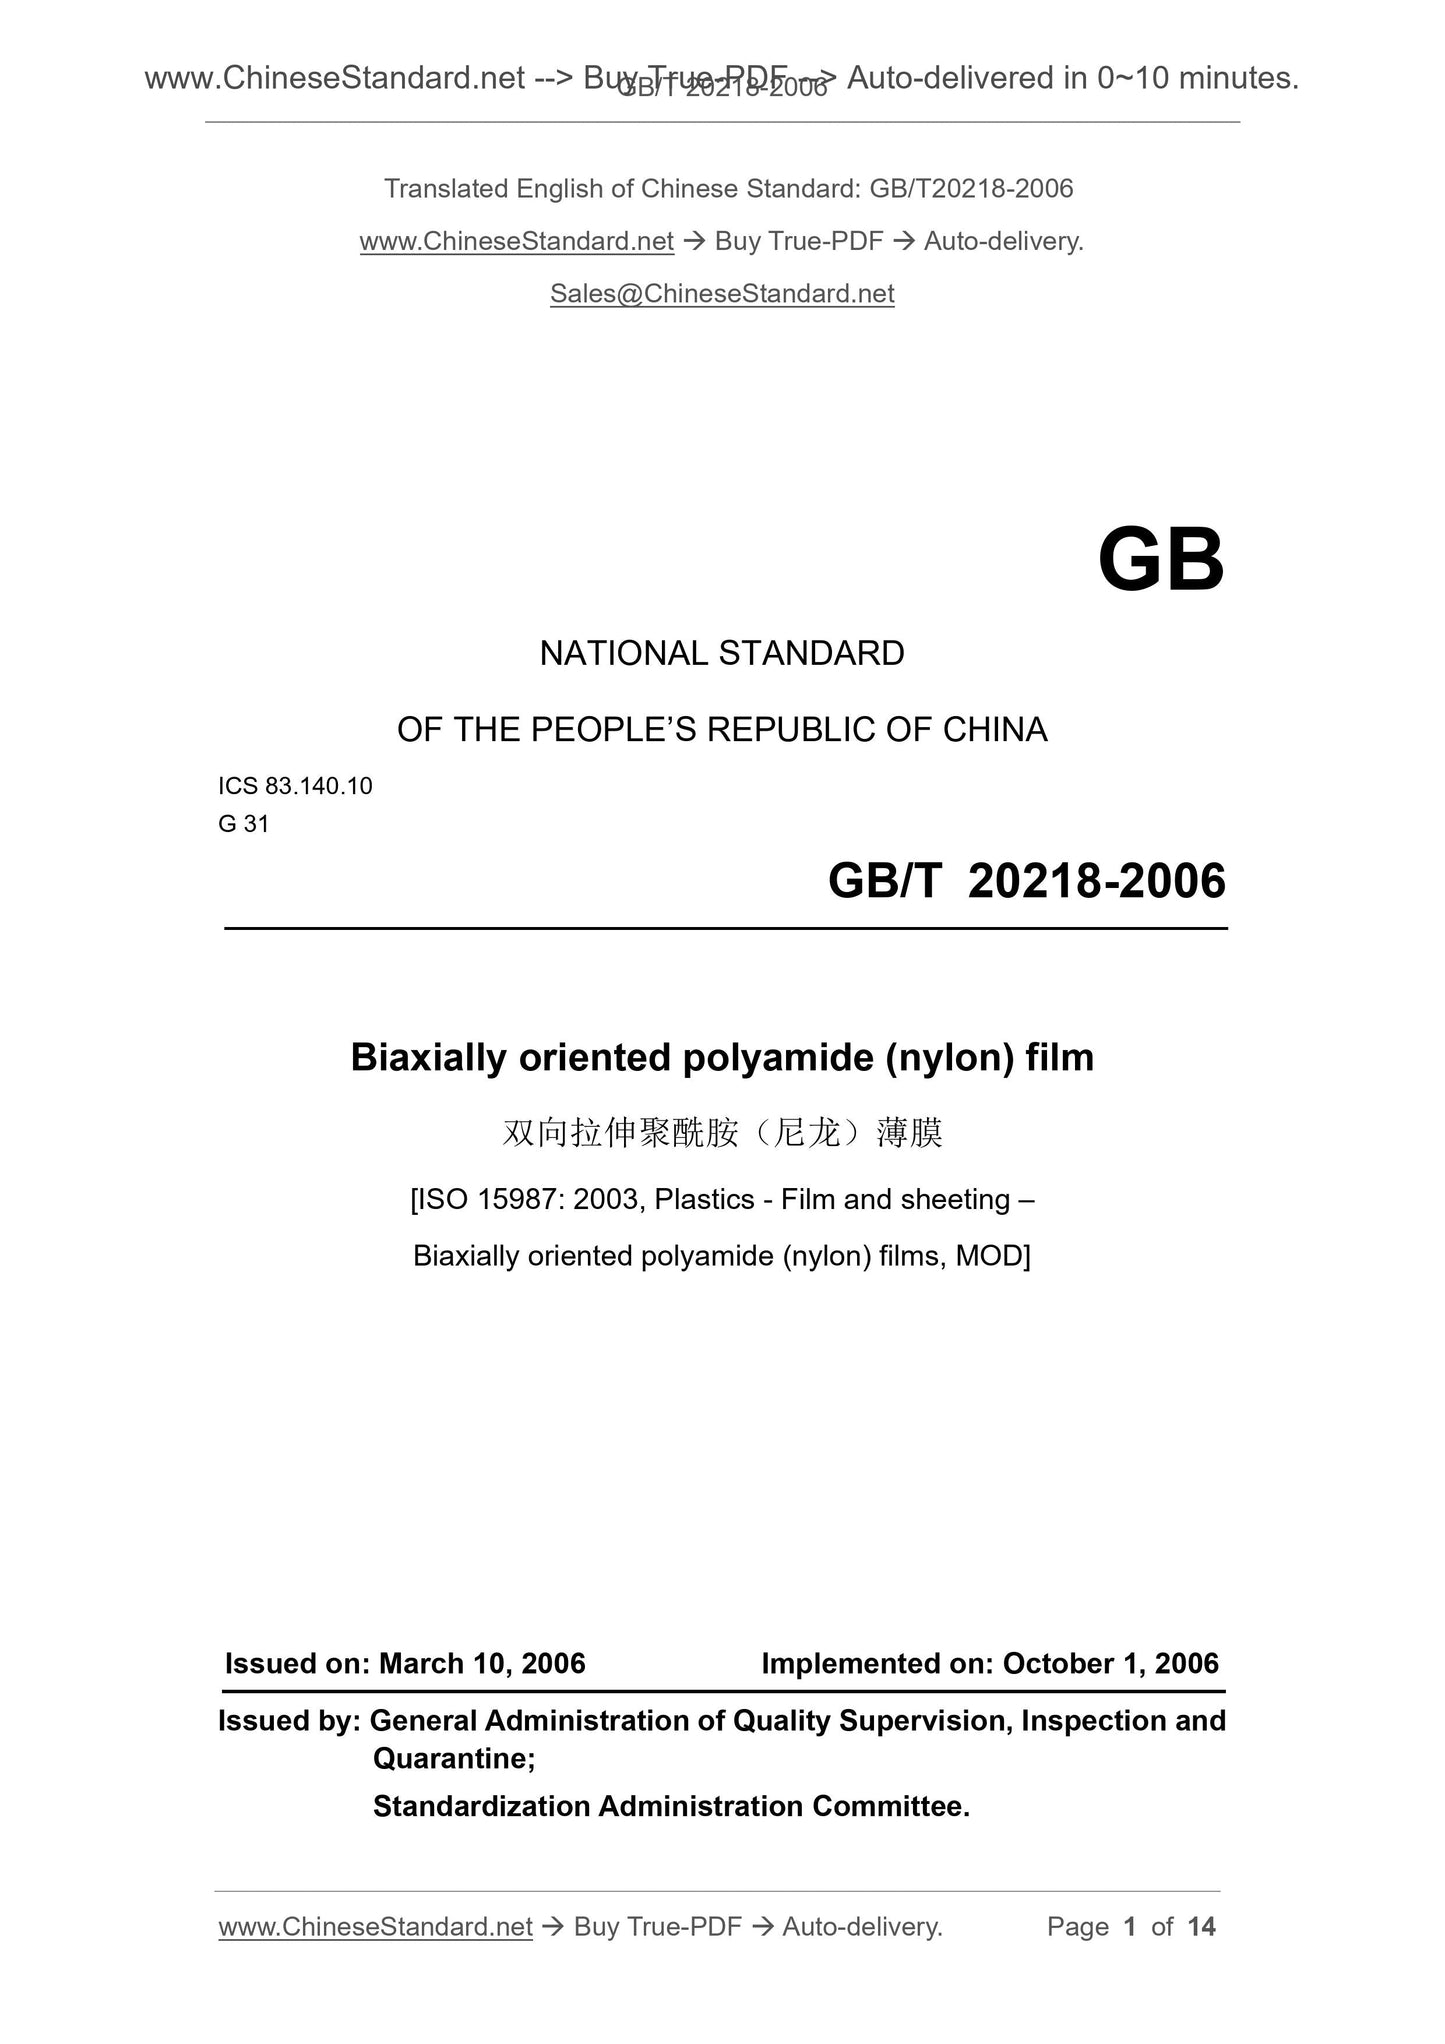 GB/T 20218-2006 Page 1